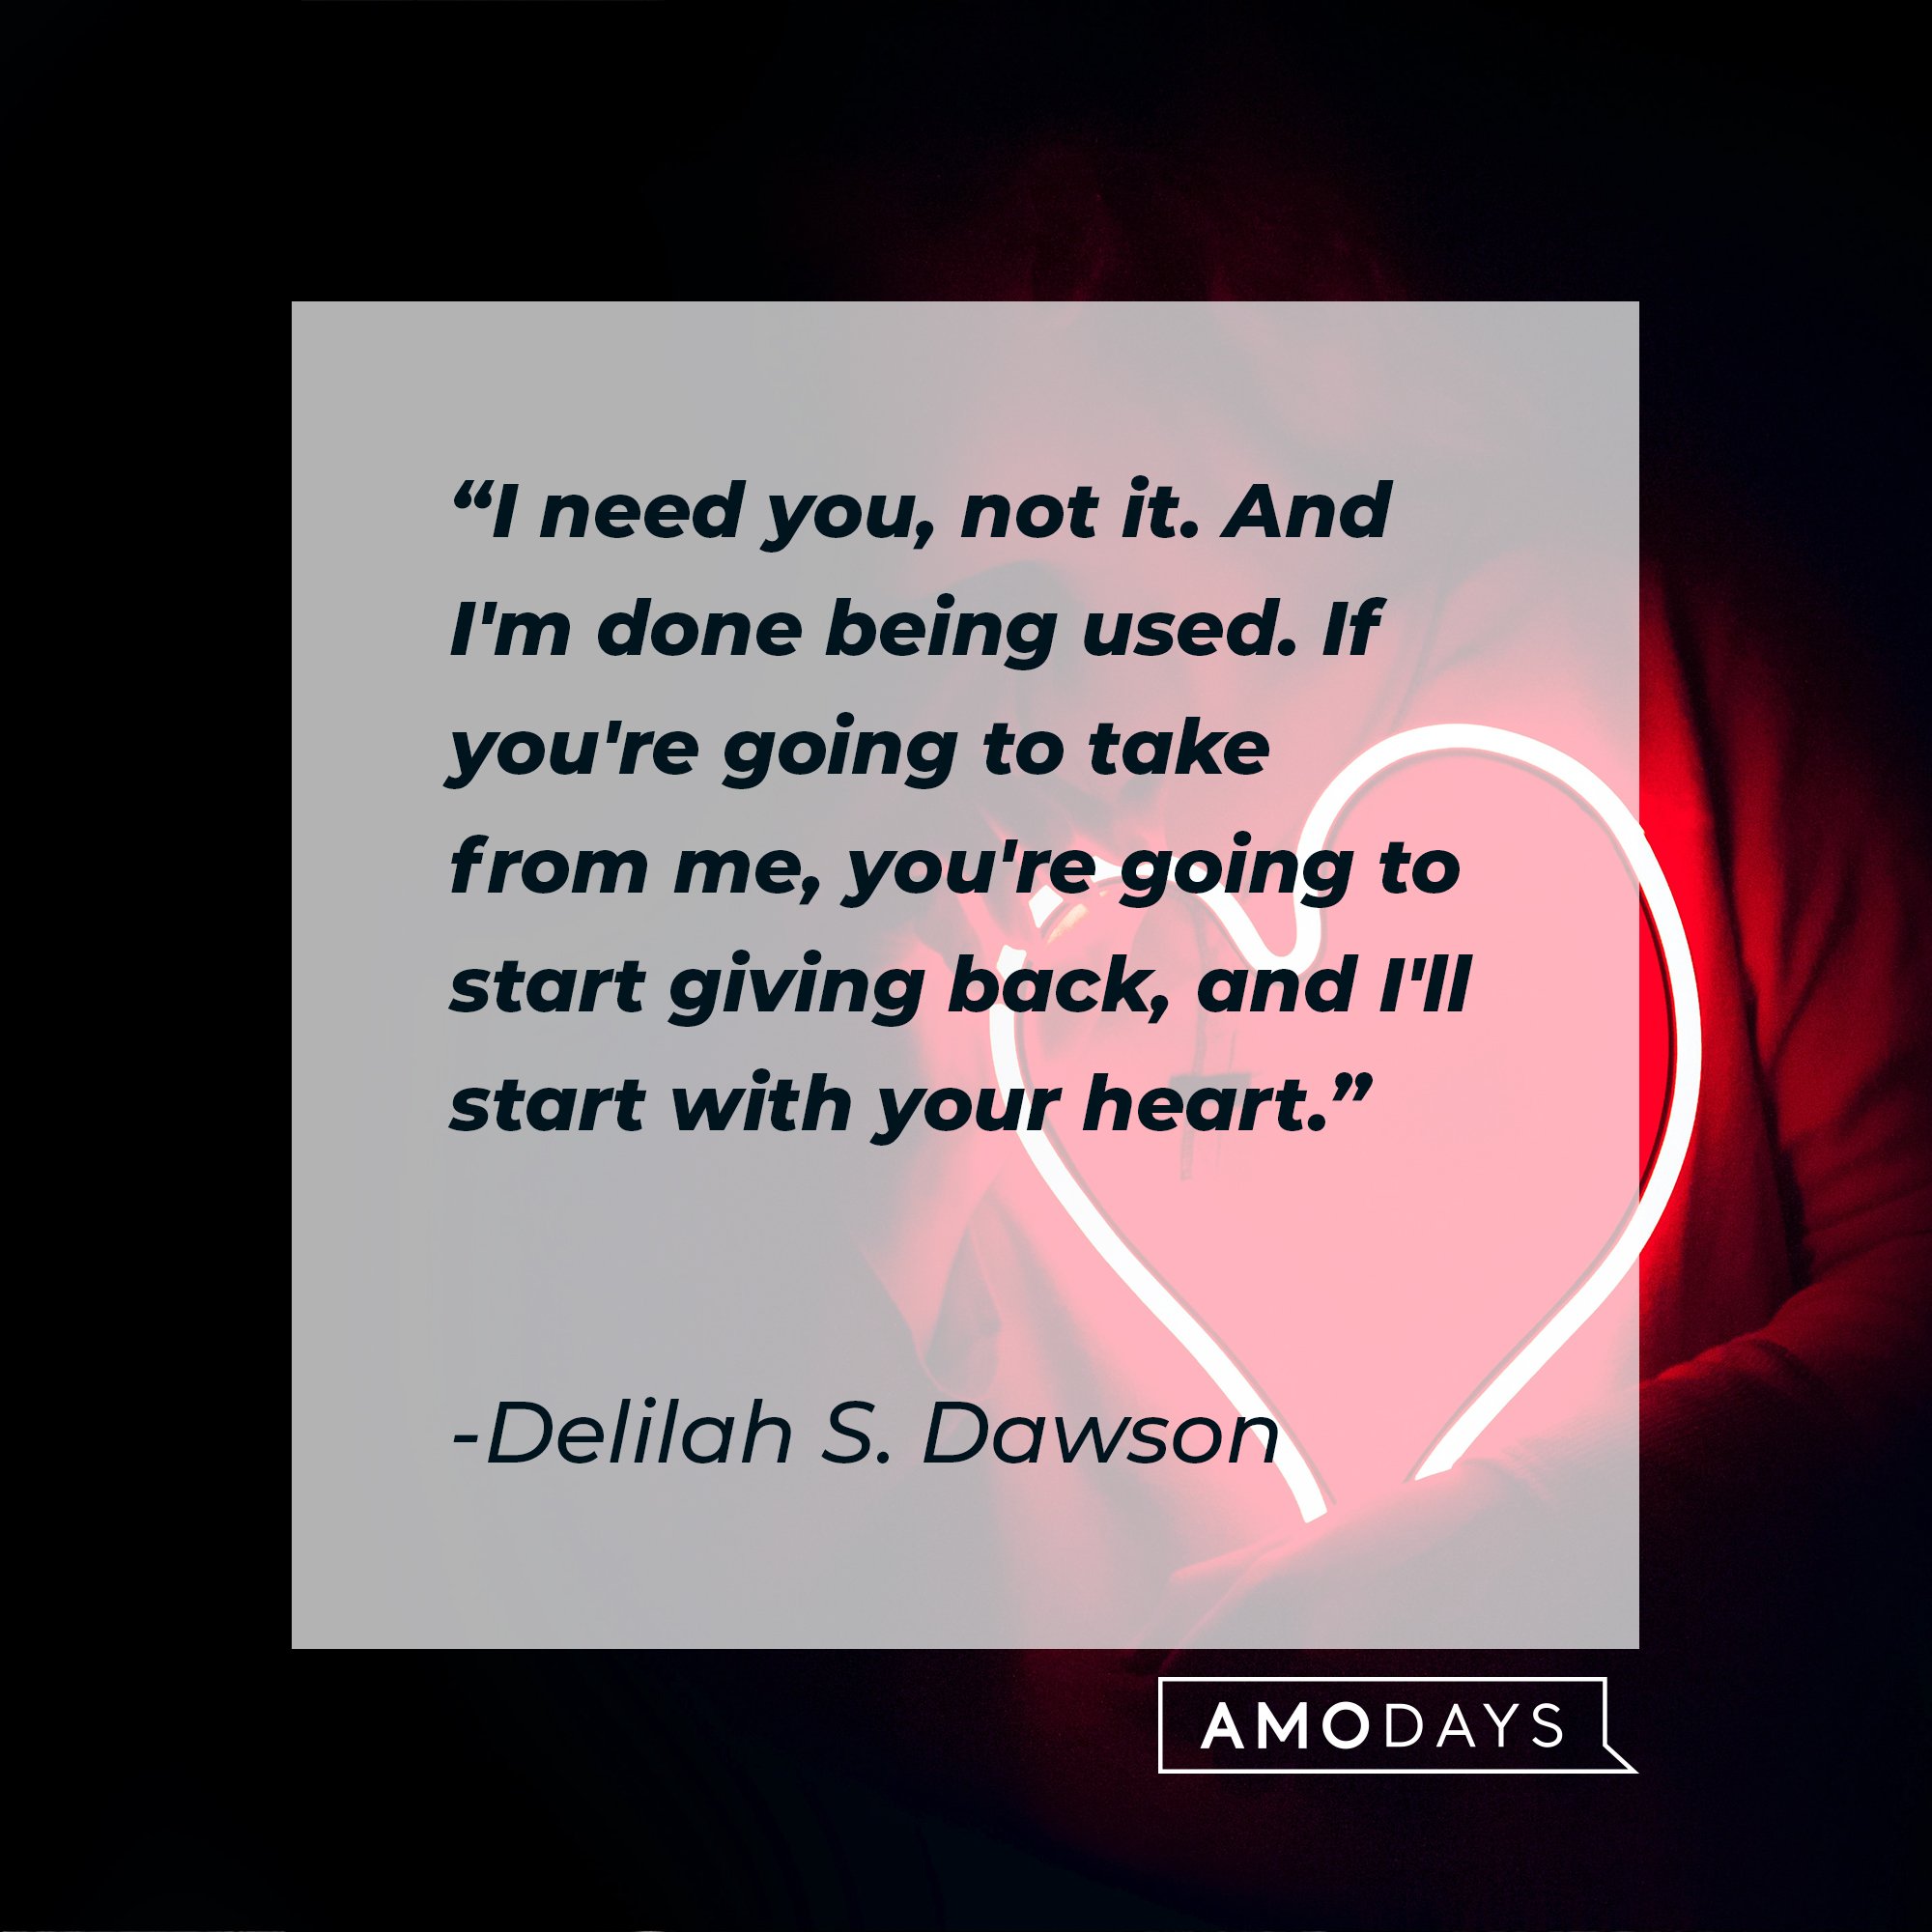 Delilah S. Dawson’s quote: "I need you, not it. And I'm done being used. If you're going to take from me, you're going to start giving back, and I'll start with your heart." | Image: AmoDays